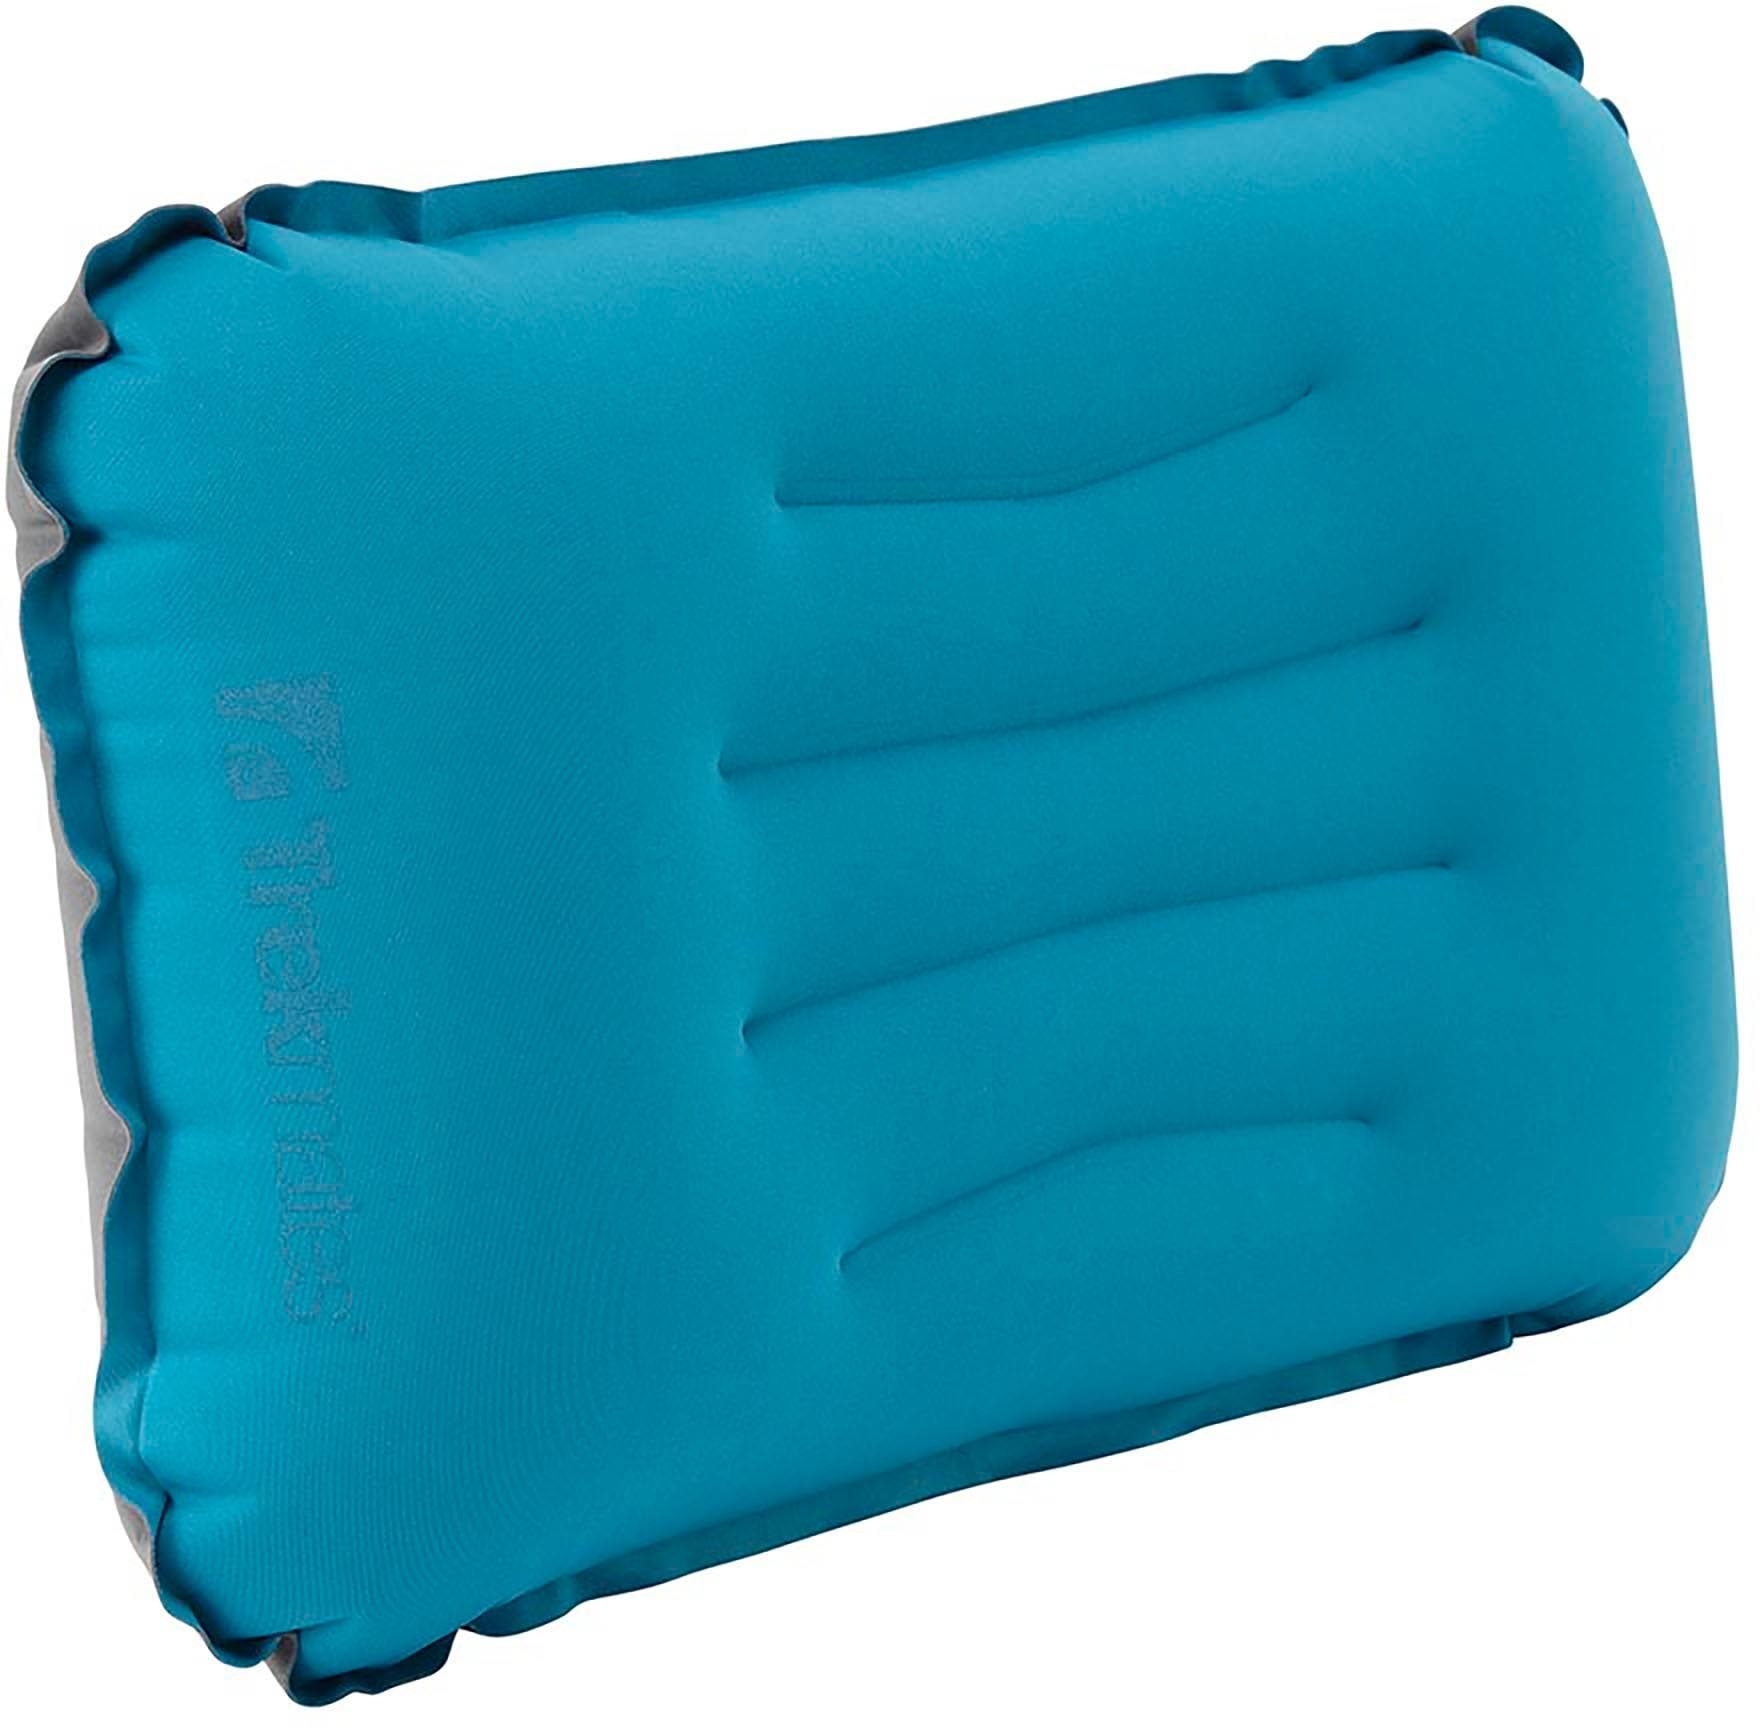 blue inflatable camping pillow